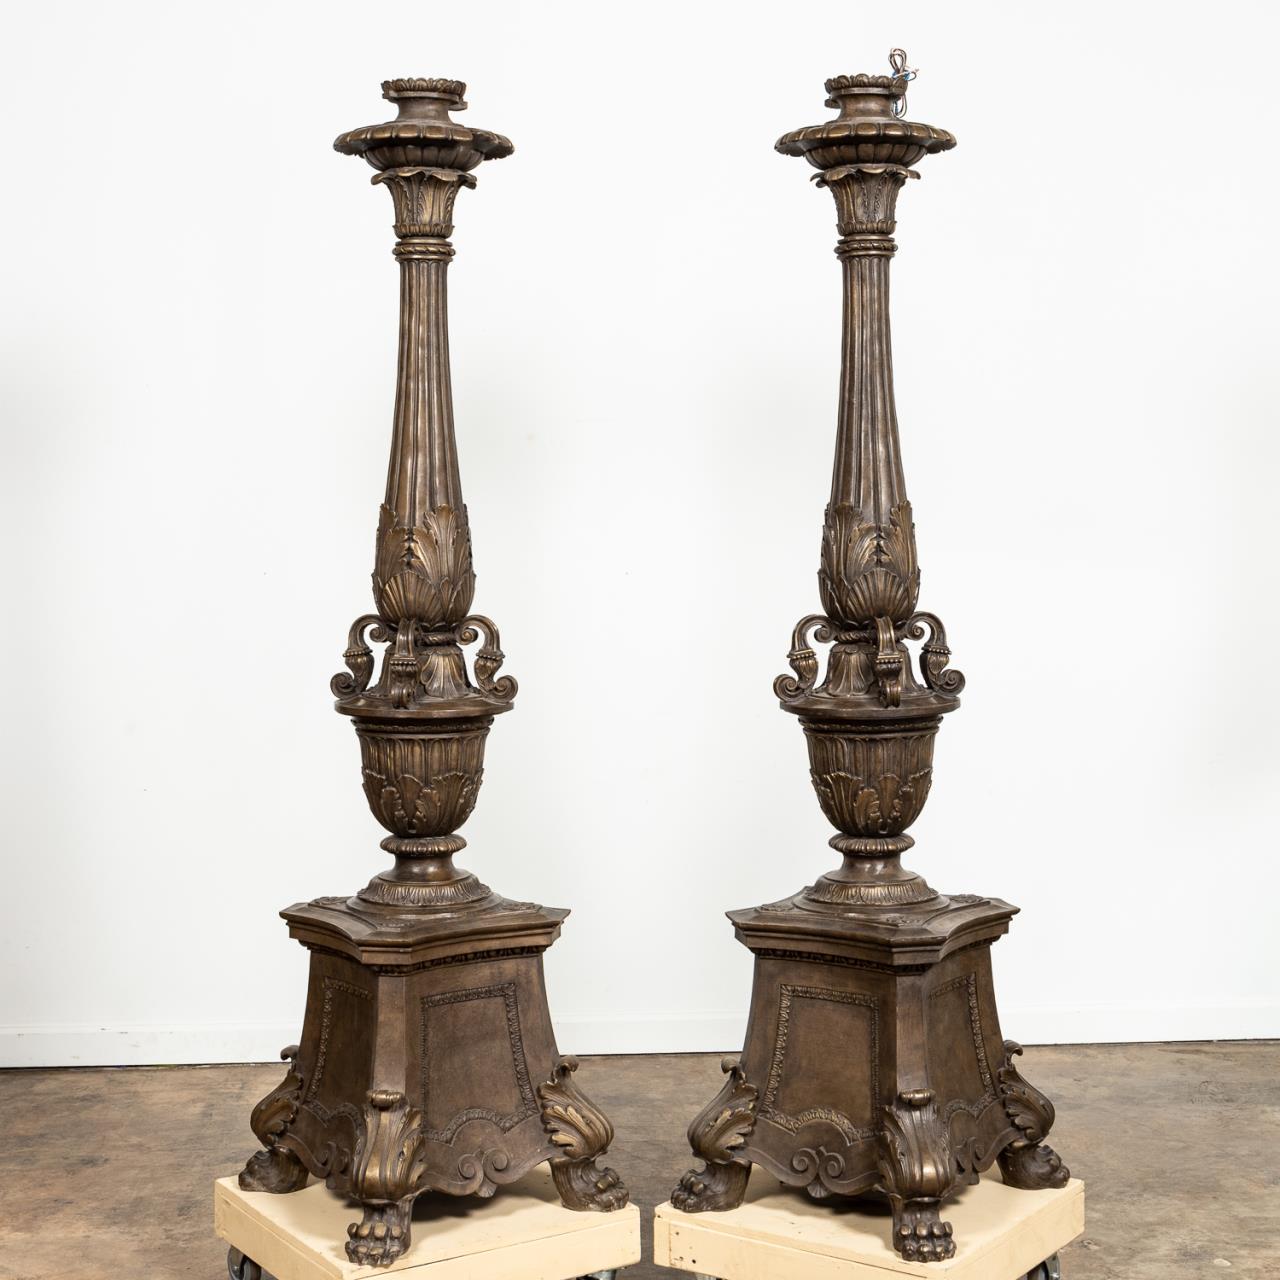 PAIR OF EMPIRE STYLE PALATIAL TORCHIERES 35d66d